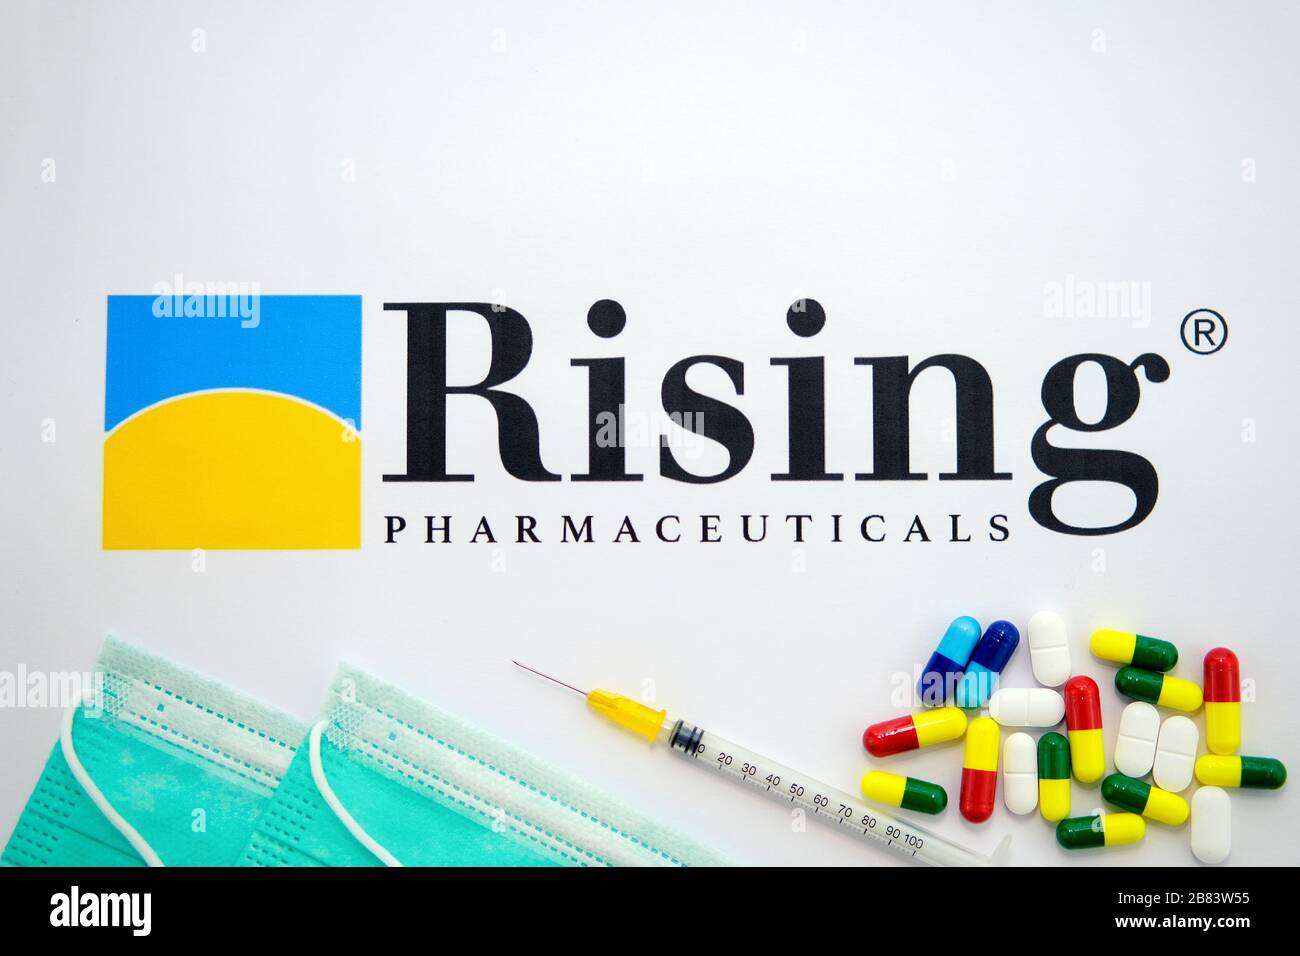 Rising Pharmaceuticals logo printed on paper and masks, syringe and pills on top of it. The company makes new Chloroquine drug against Covid-19. Stock Photo